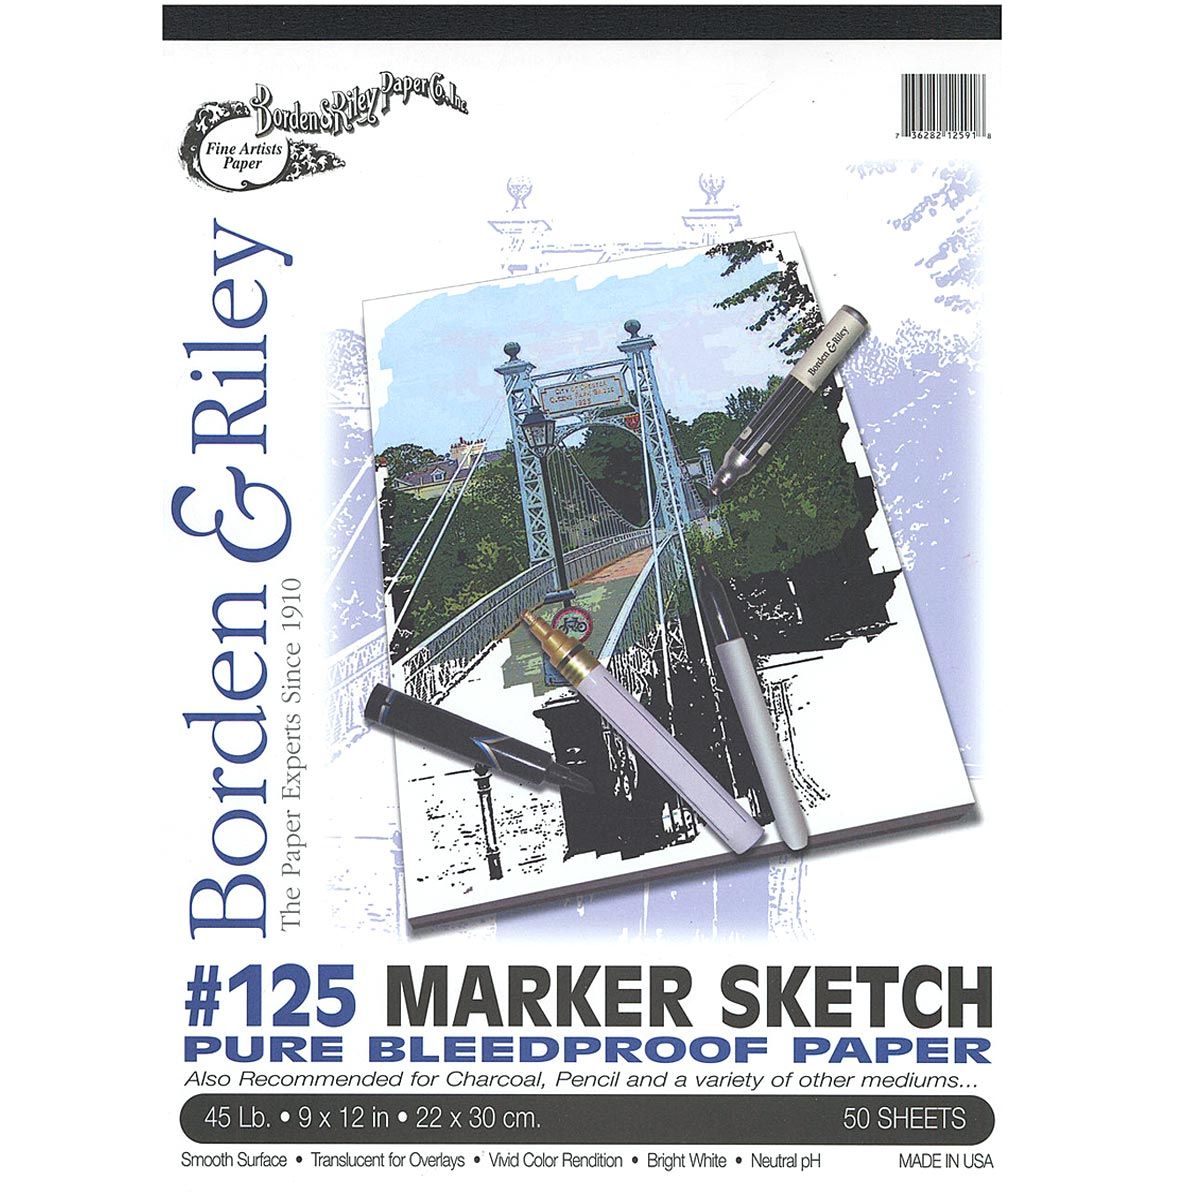 Borden & Riley #125 Marker Sketch Pure Bleedproof Pad, 9x12 in, 50 Sheets